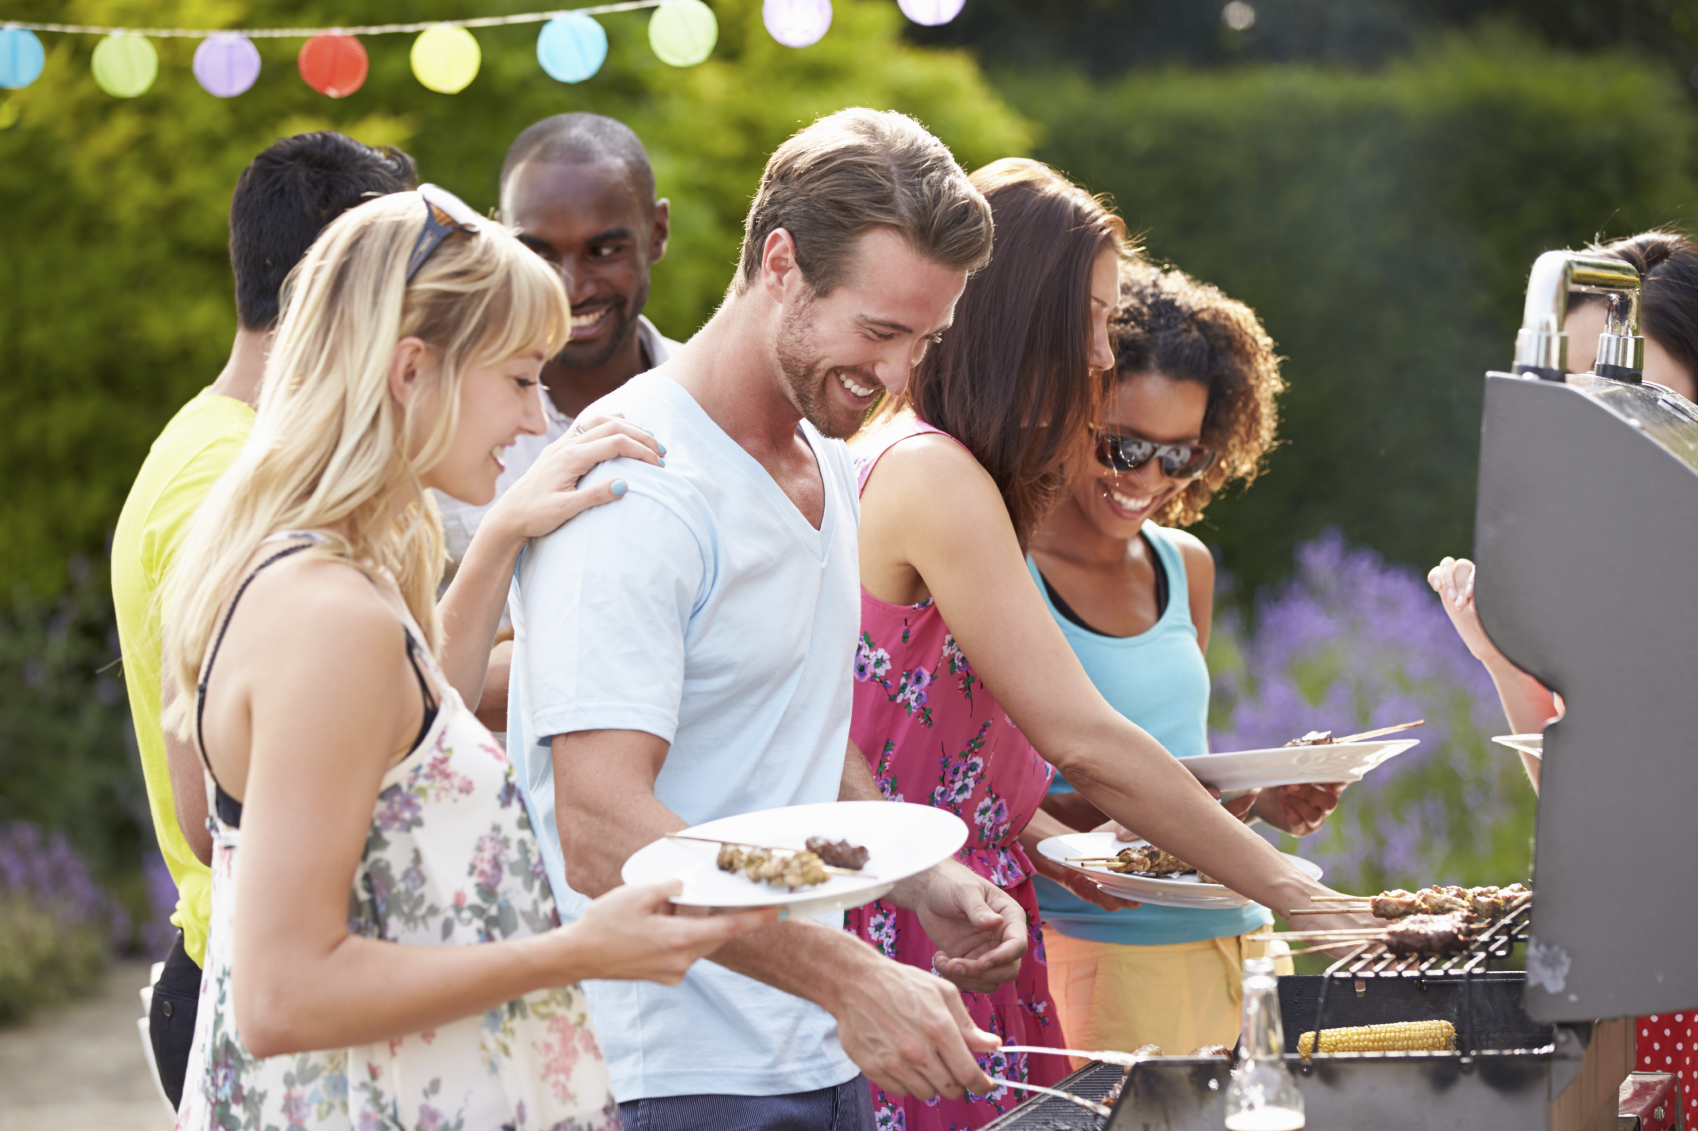 Grilling with Propane: Benefits, Tips, and Recipes